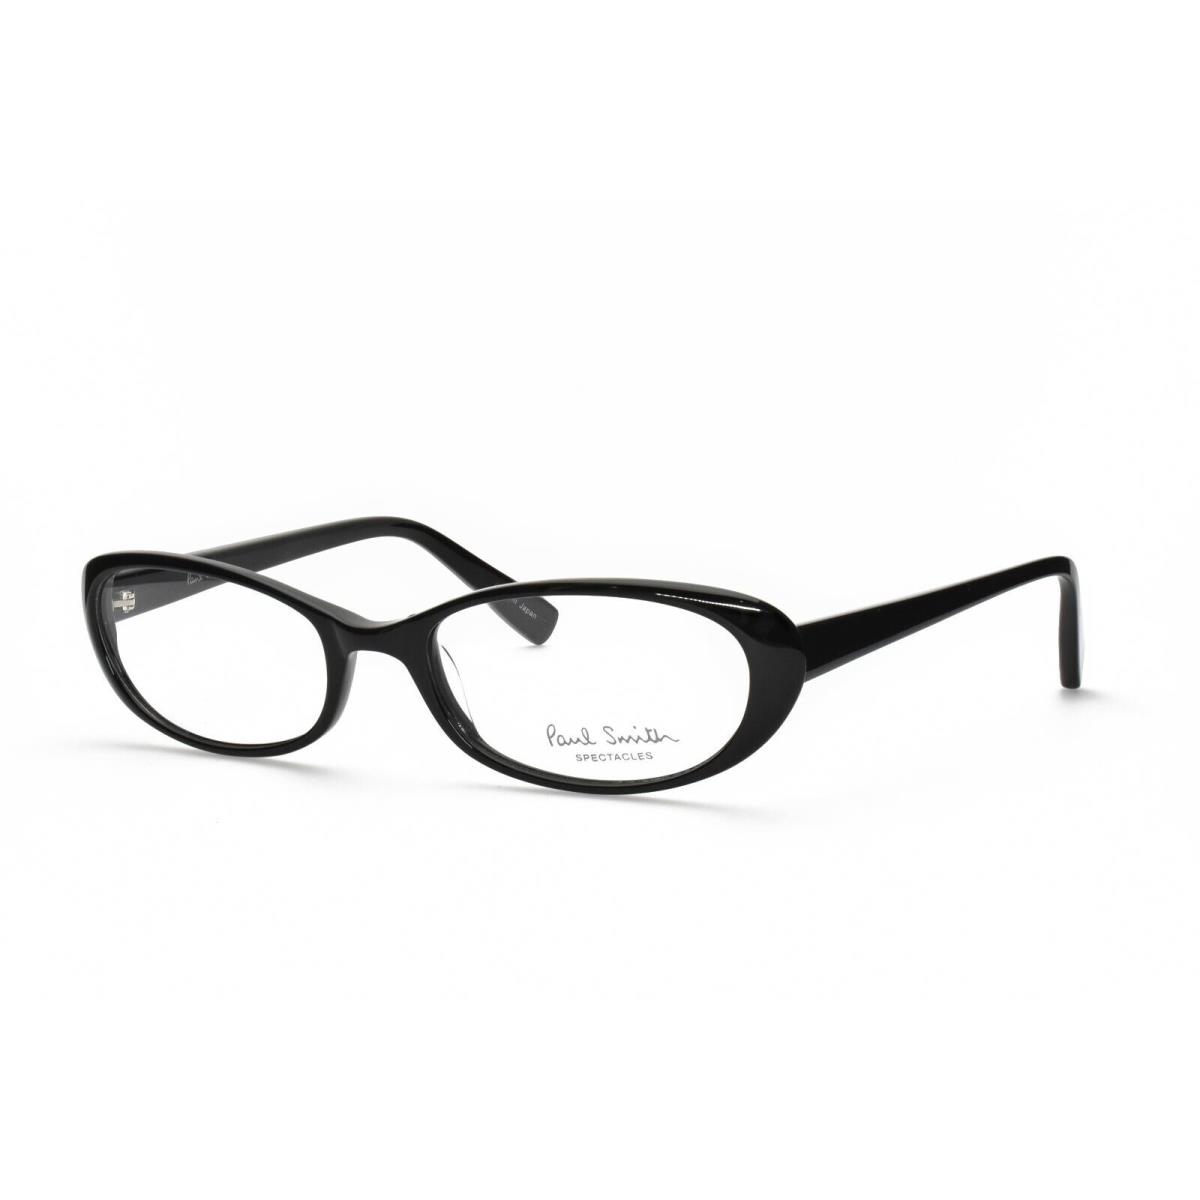 Paul Smith PS 278 OX Eyeglasses Frames Only 51-18-135